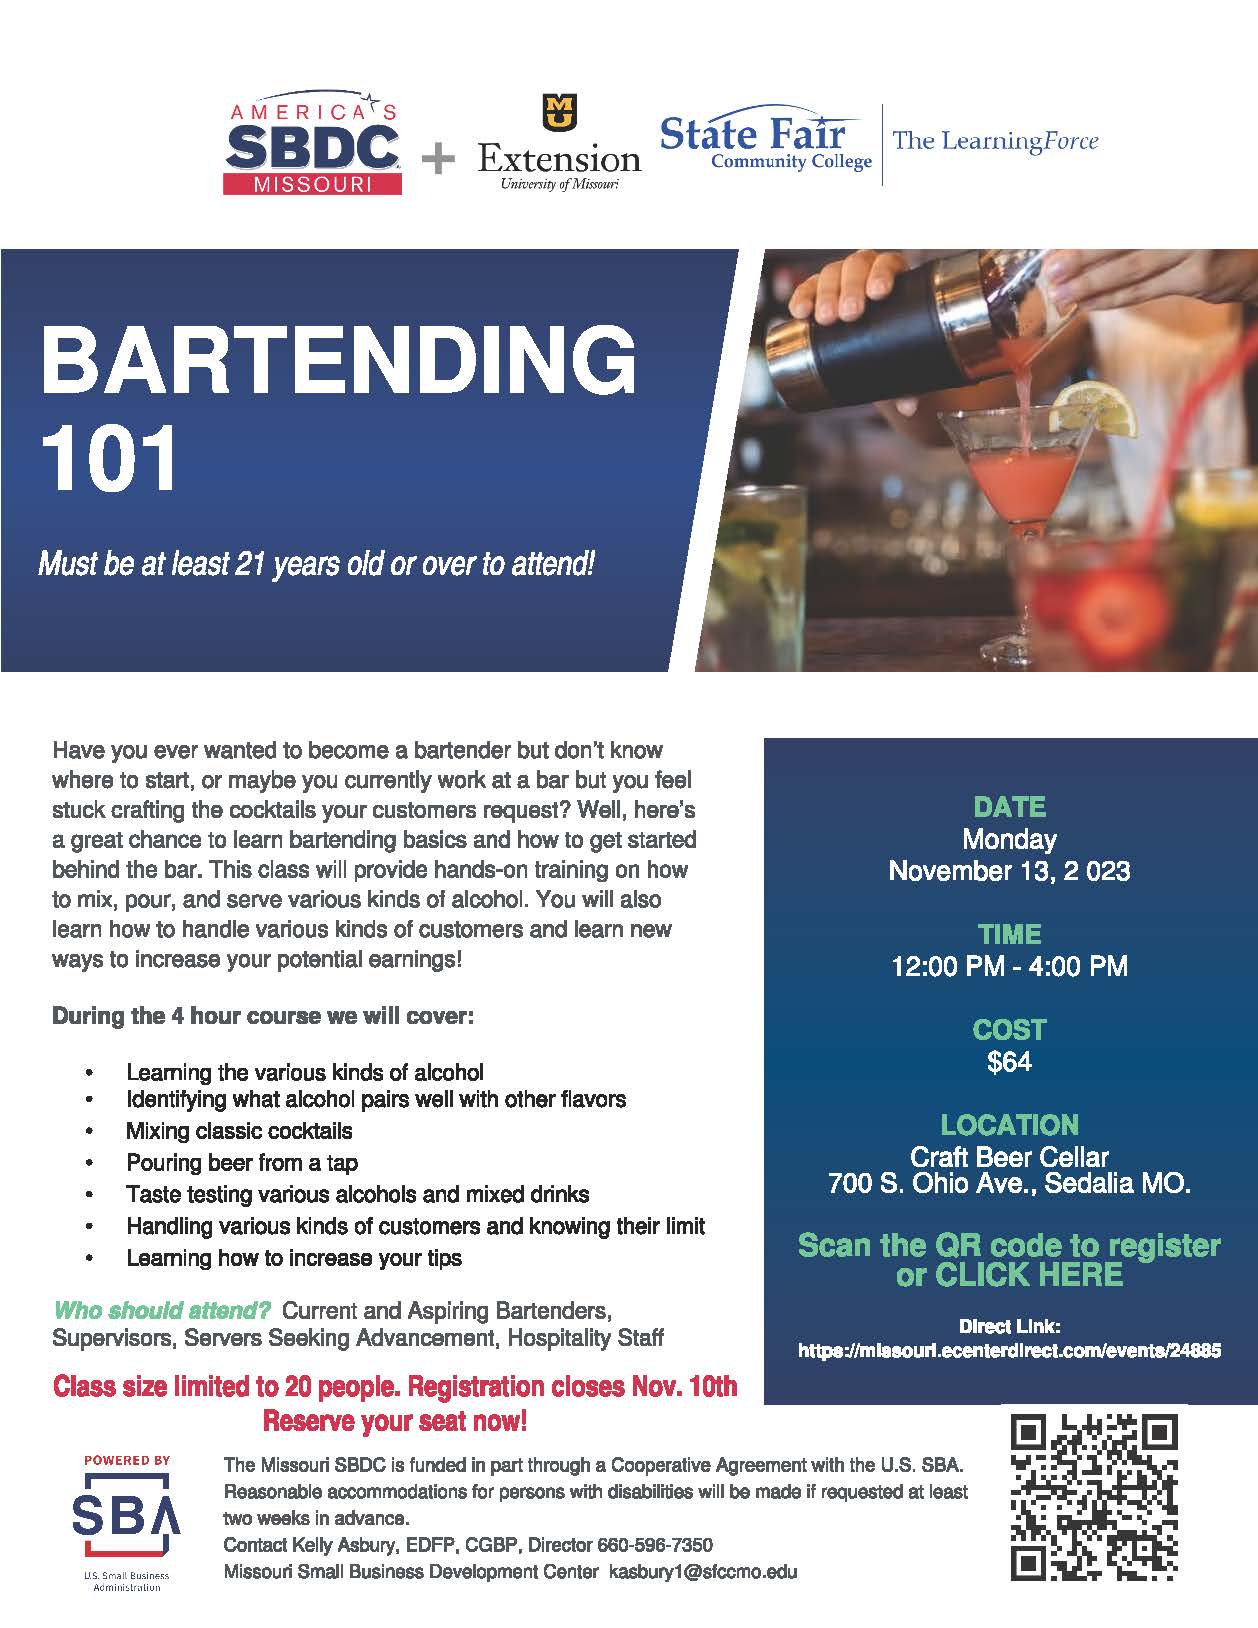 Read more about Missouri SBDC and Learning Force to host a Bartending Basics Workshop